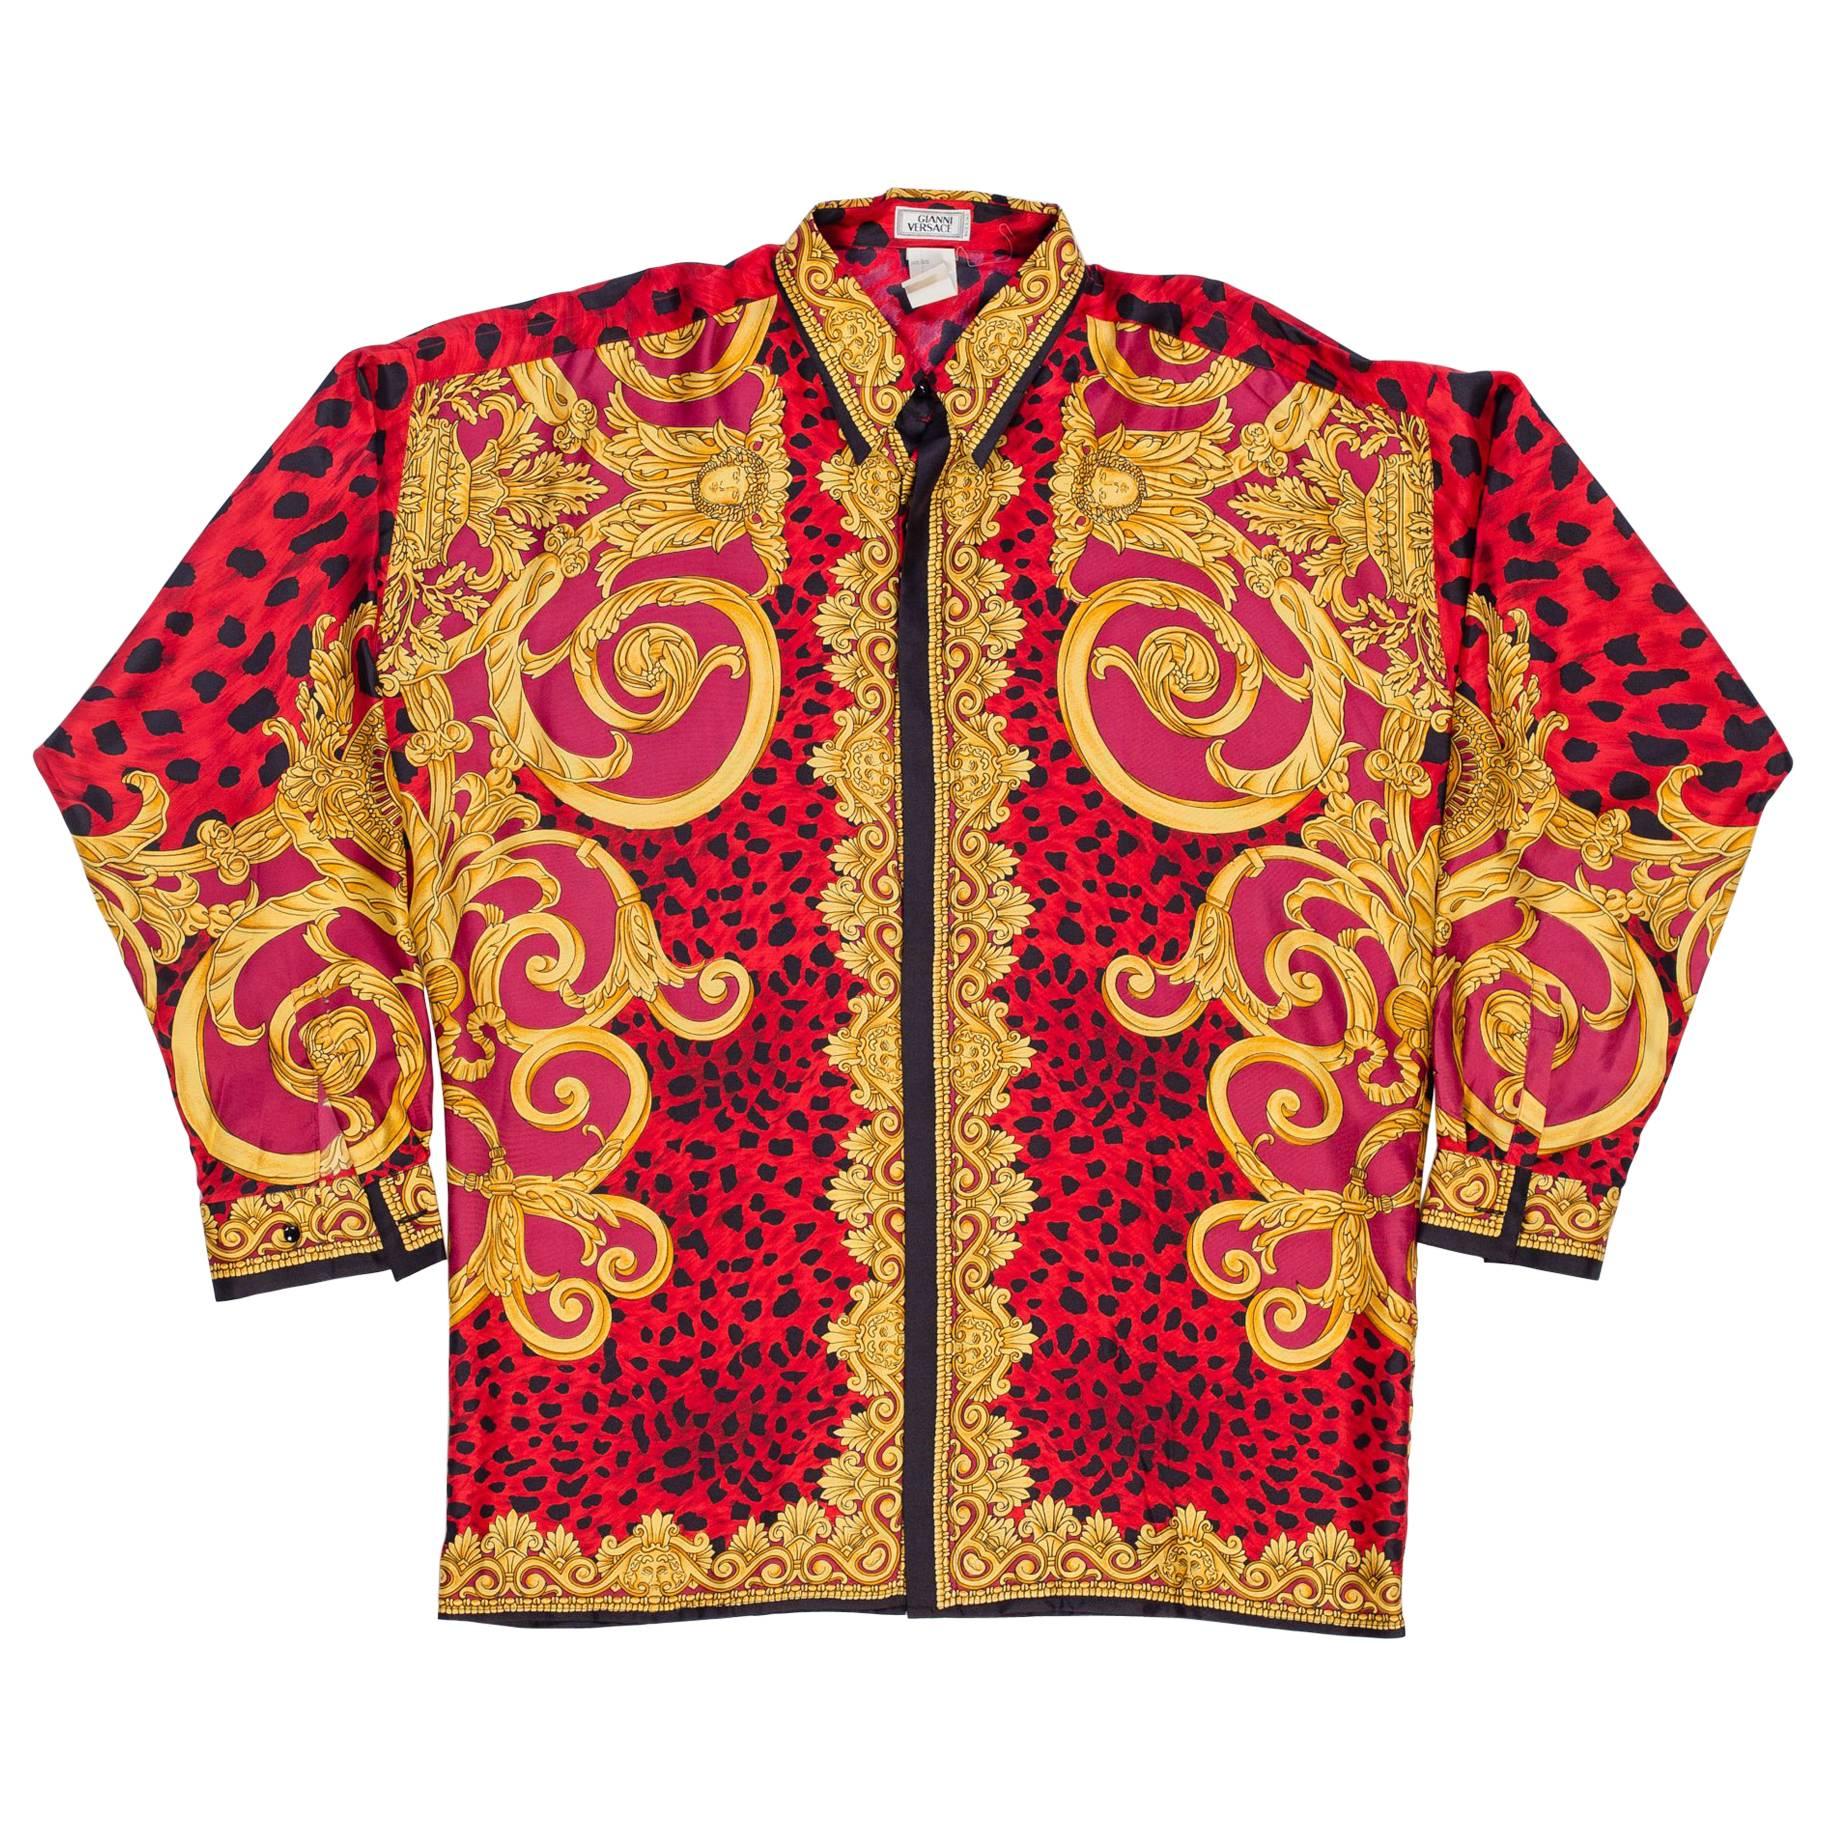 Gianni Versace early 1990s Mens Red Baroque Leopard Print Silk Shirt